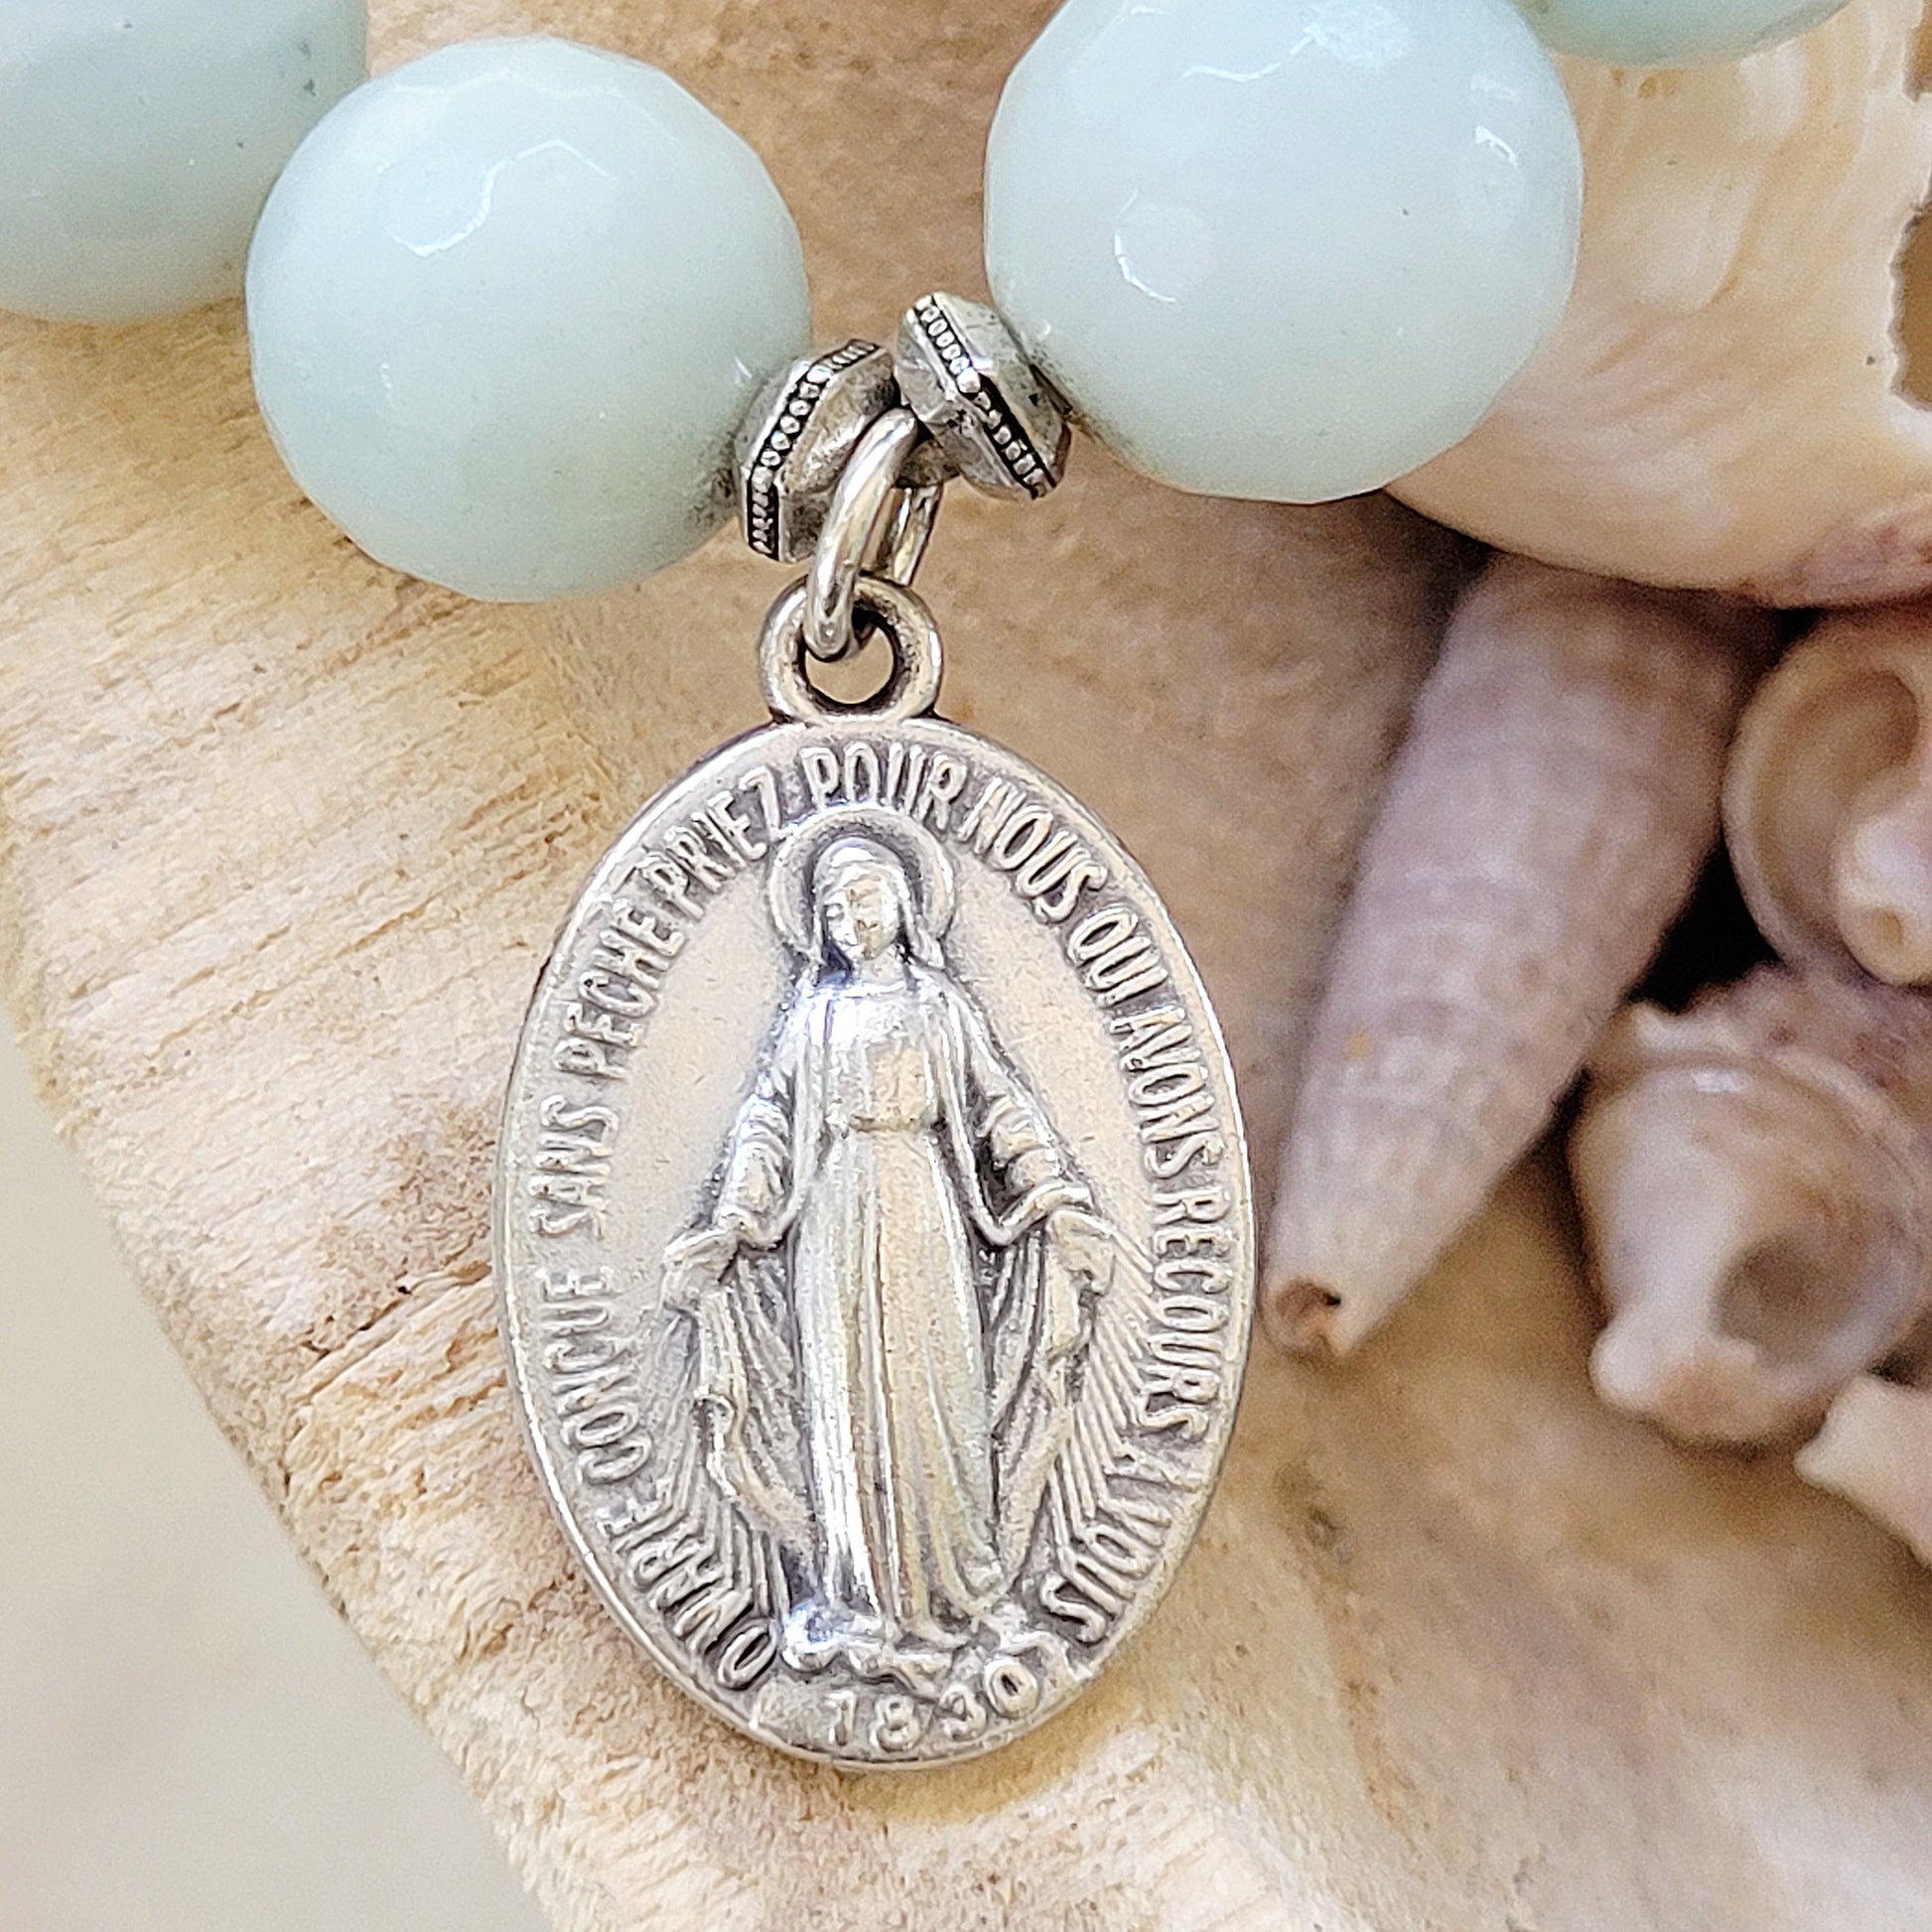 Amazonite Faceted 12mm Beaded Bracelet w/ Miraculous Mary French Medal - Afterlife Jewelry Designs